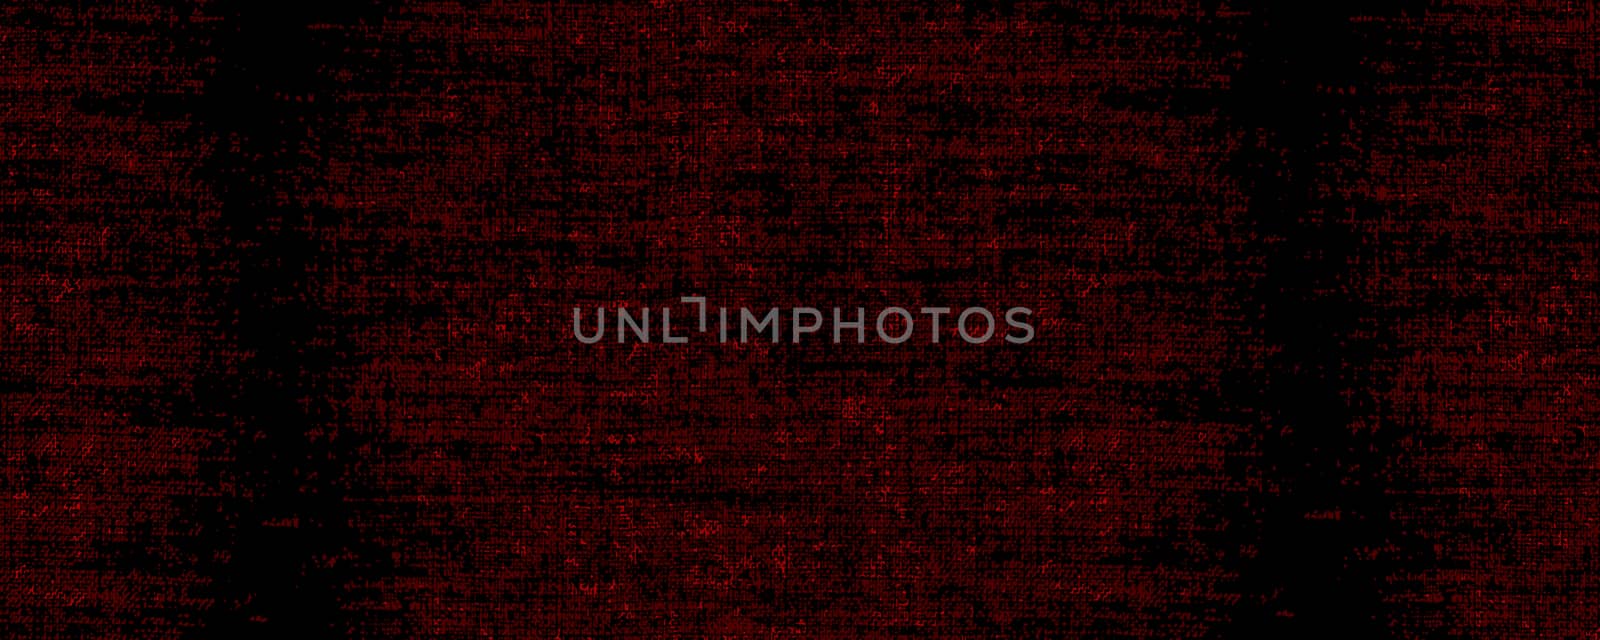 Dark red abstract illustration which can be used as a background